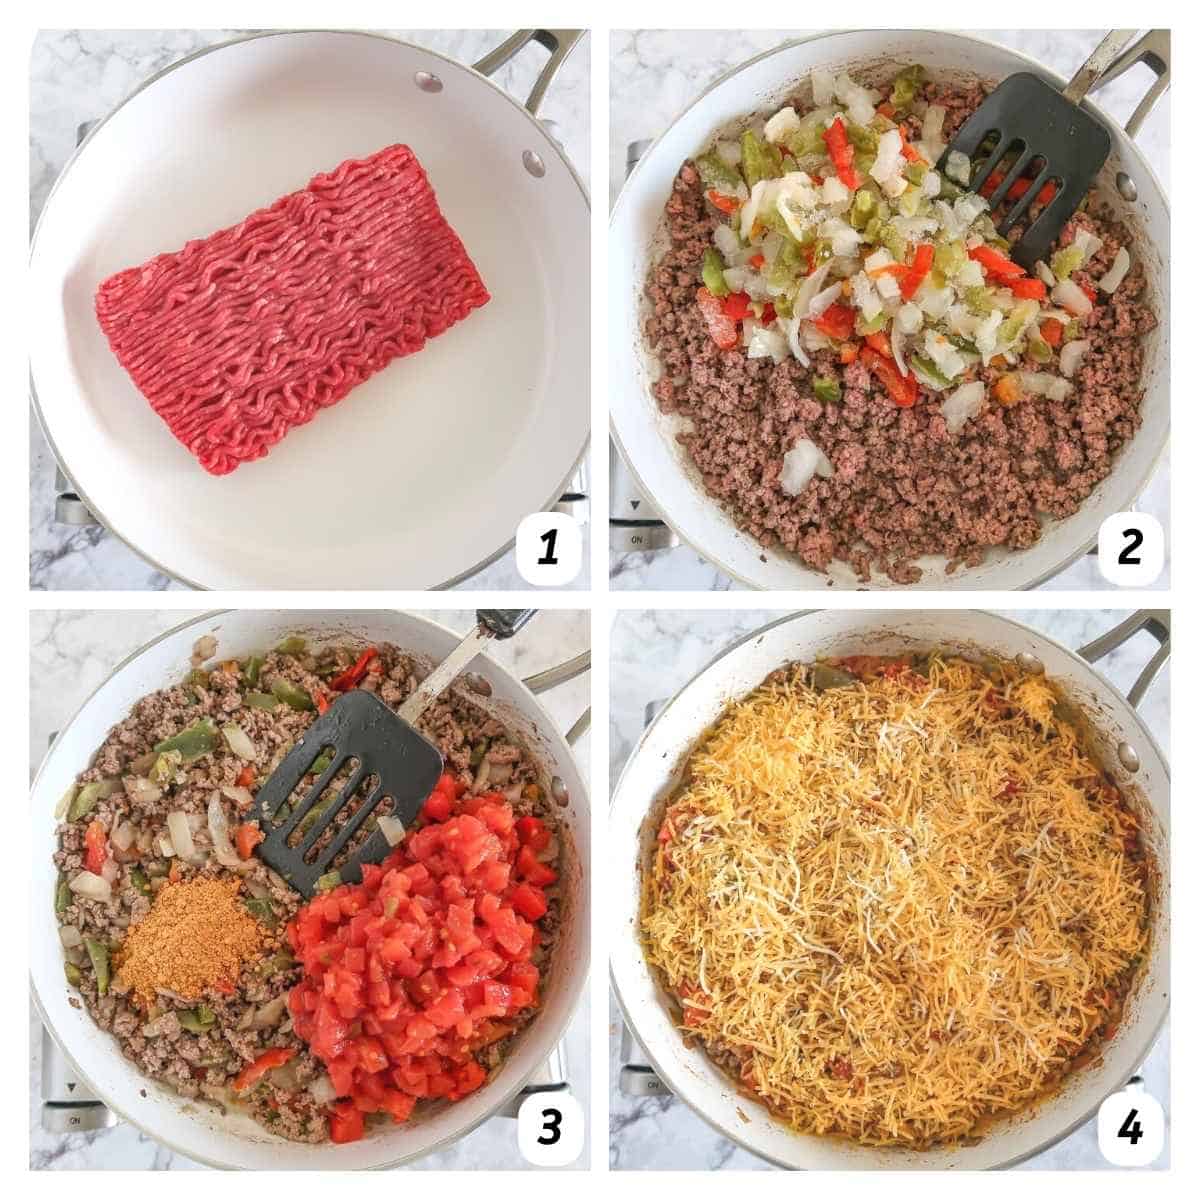 Four panel grid of process shots - browning ground beef in skillet, adding frozen veggies, adding seasoning and tomatoes, and adding cheese.